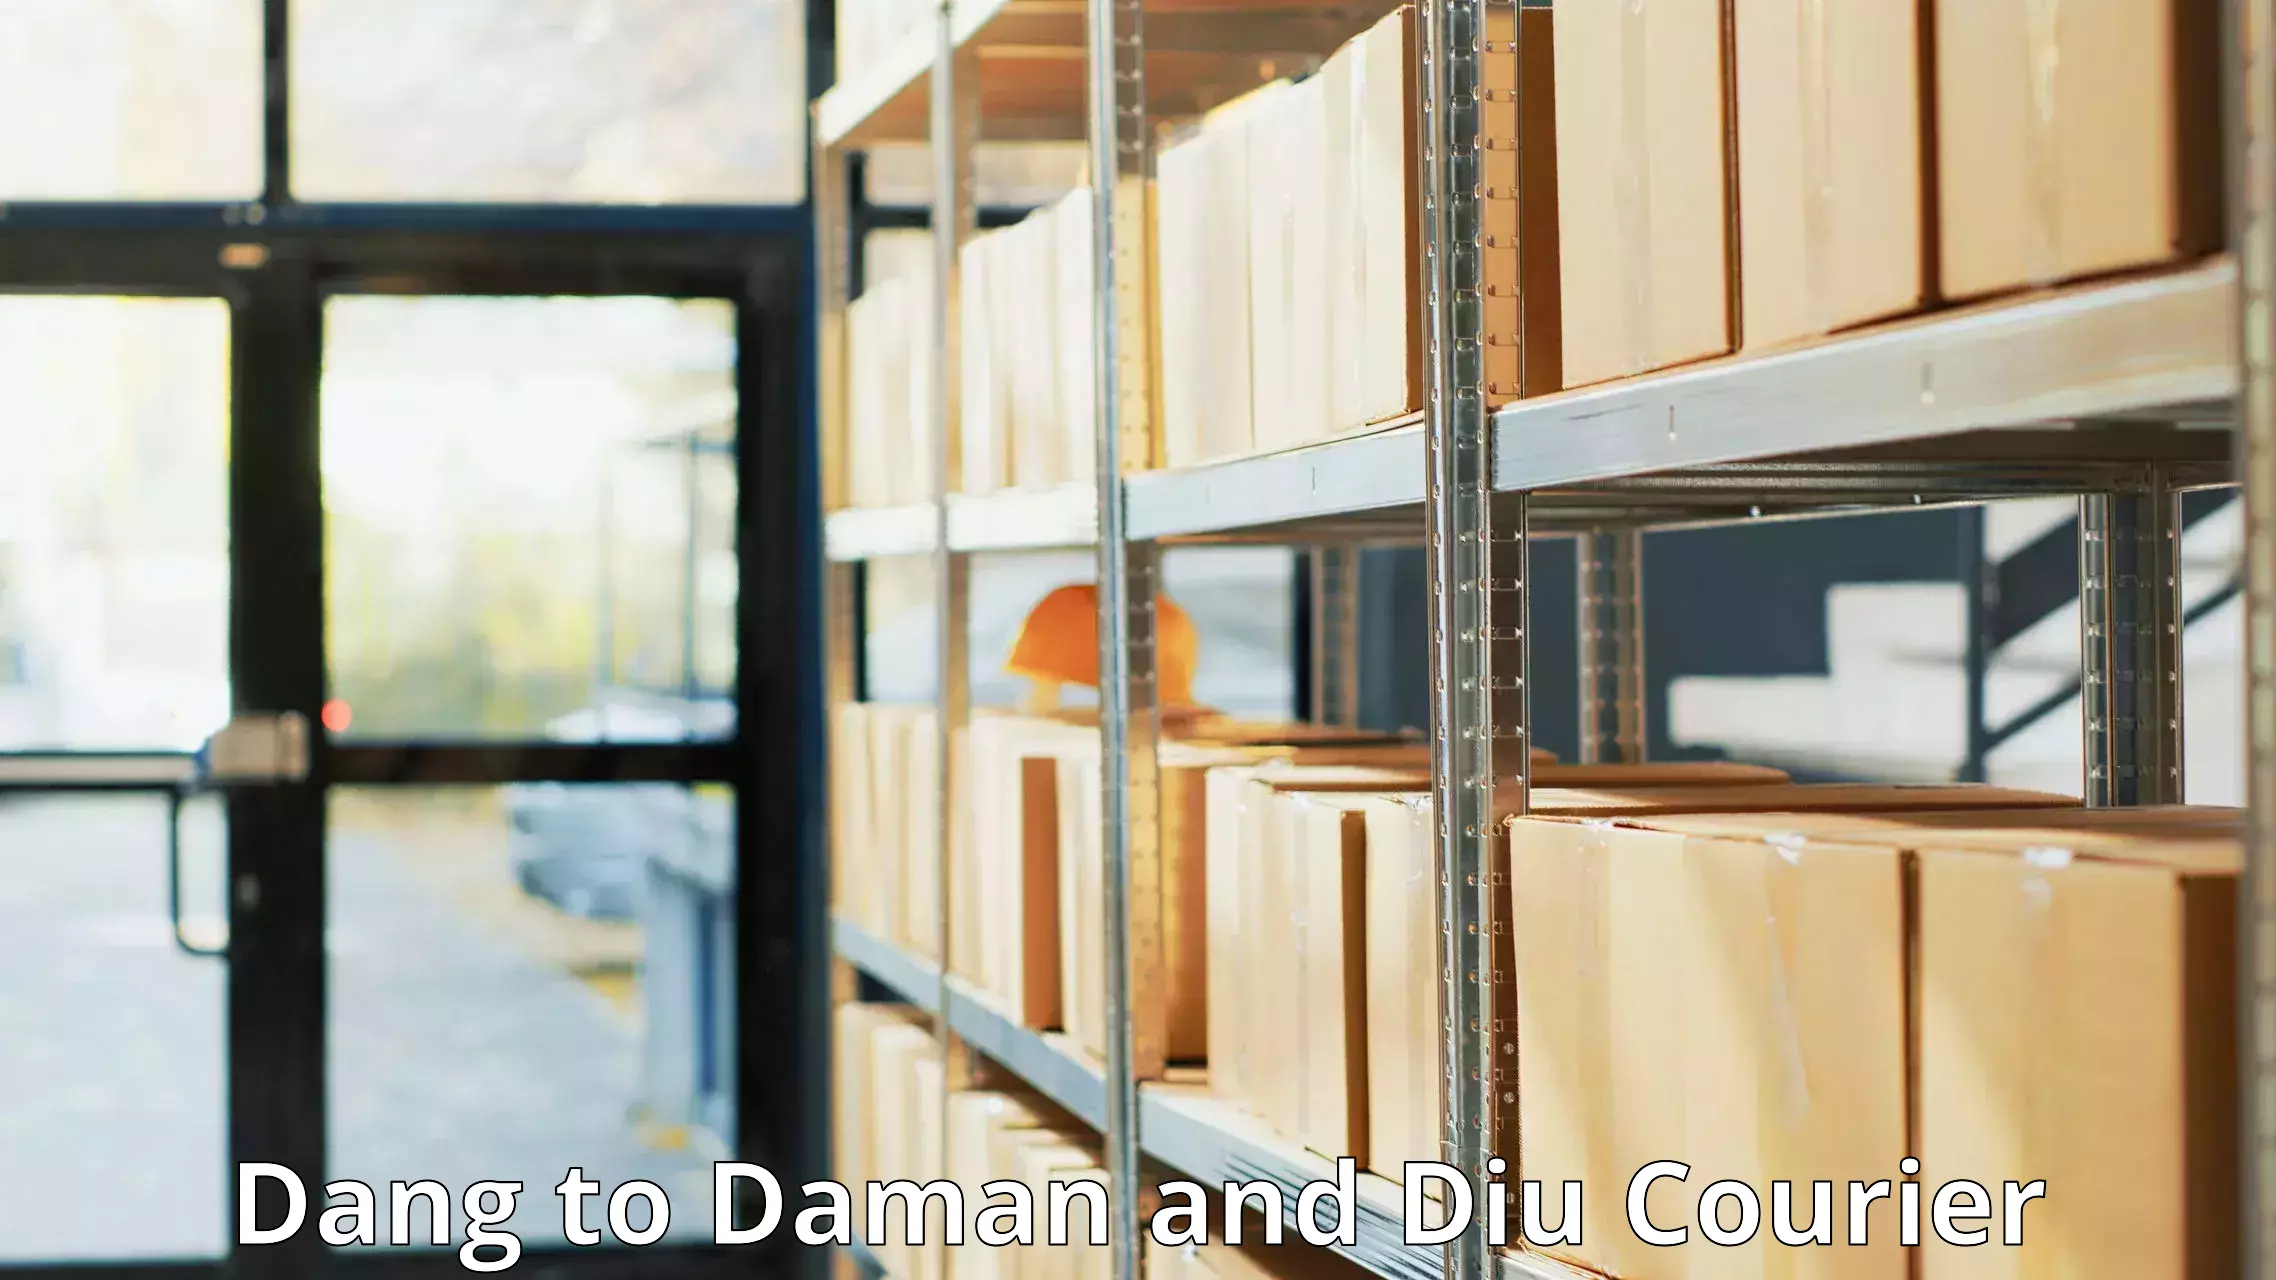 Fast shipping solutions Dang to Daman